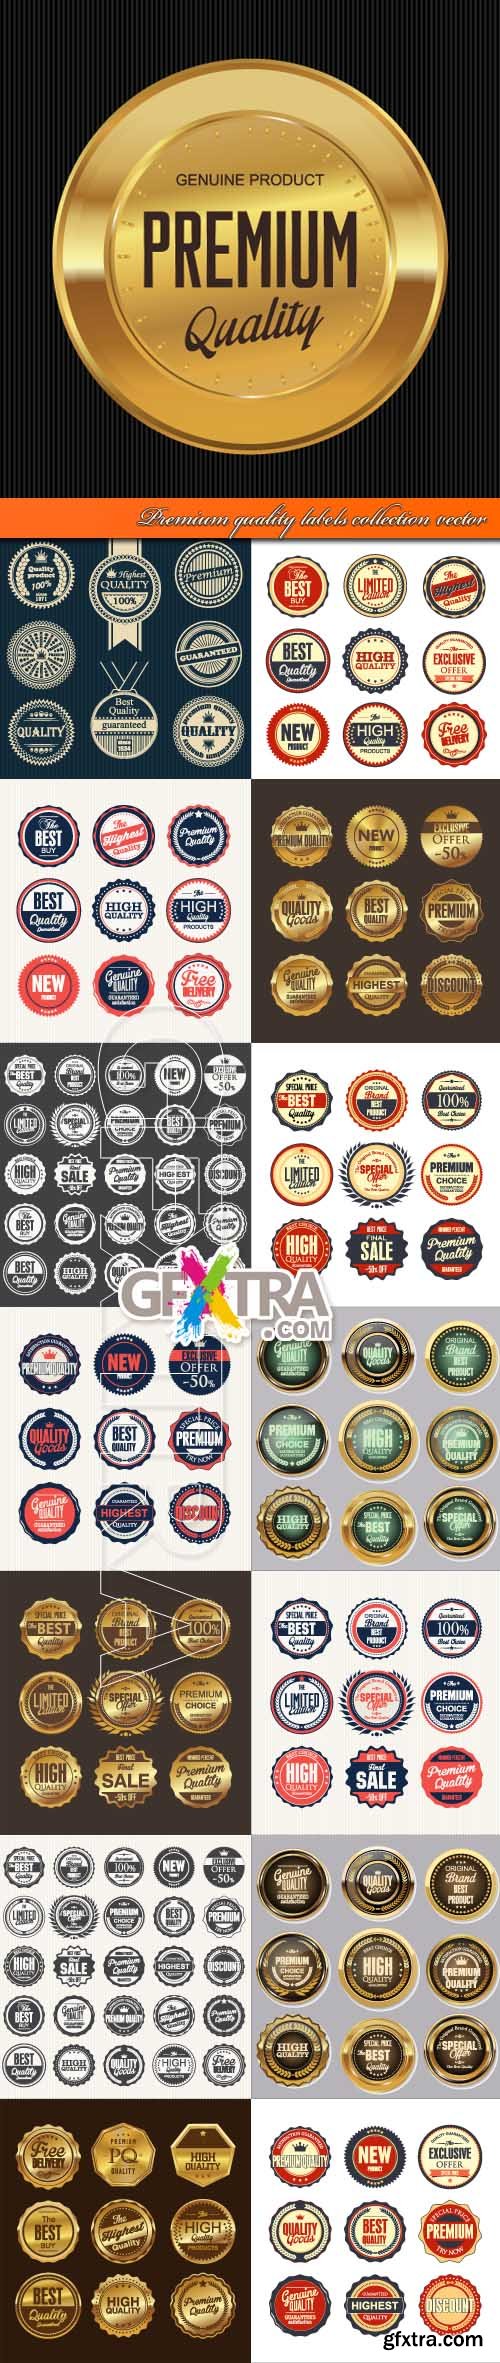 Premium quality labels collection vector